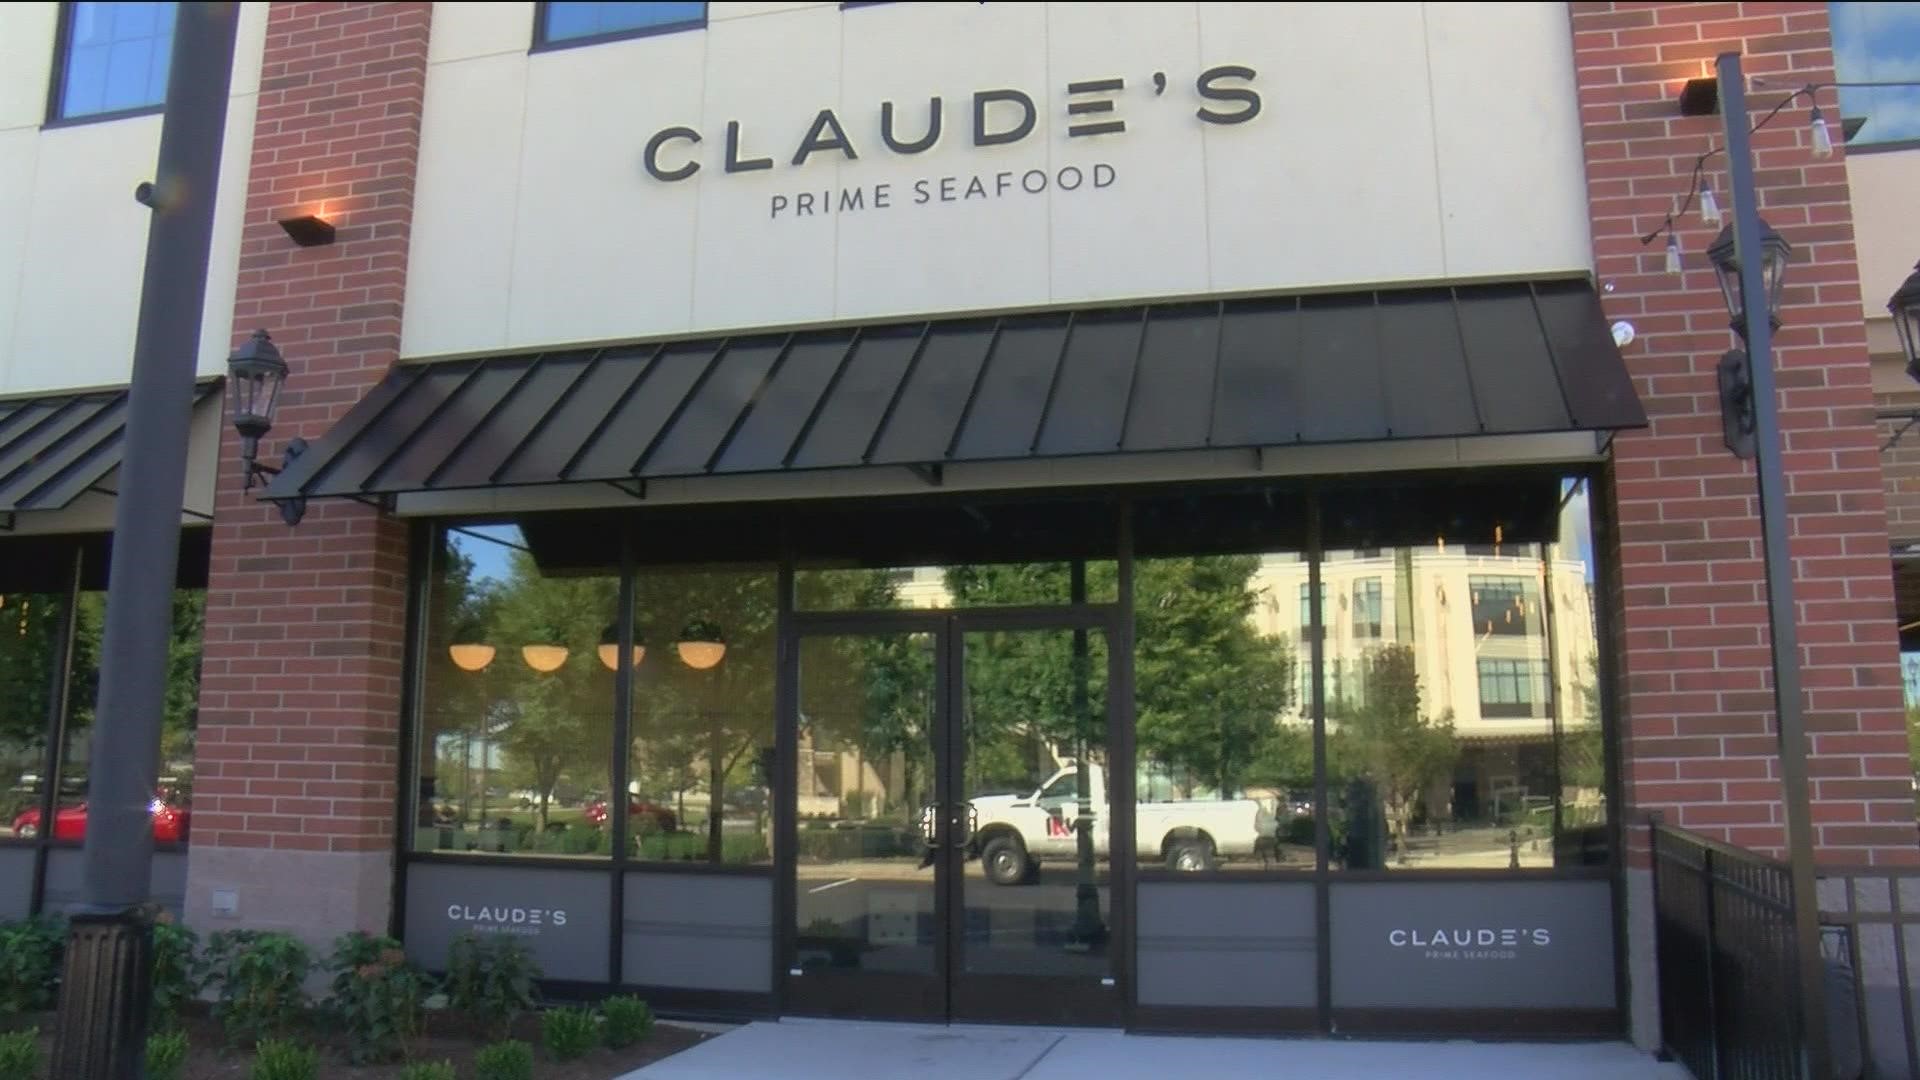 Owner Claude Harmon hopes Claude's Prime Seafood will help revitalize the area and give area residents a taste for high-quality seafood.